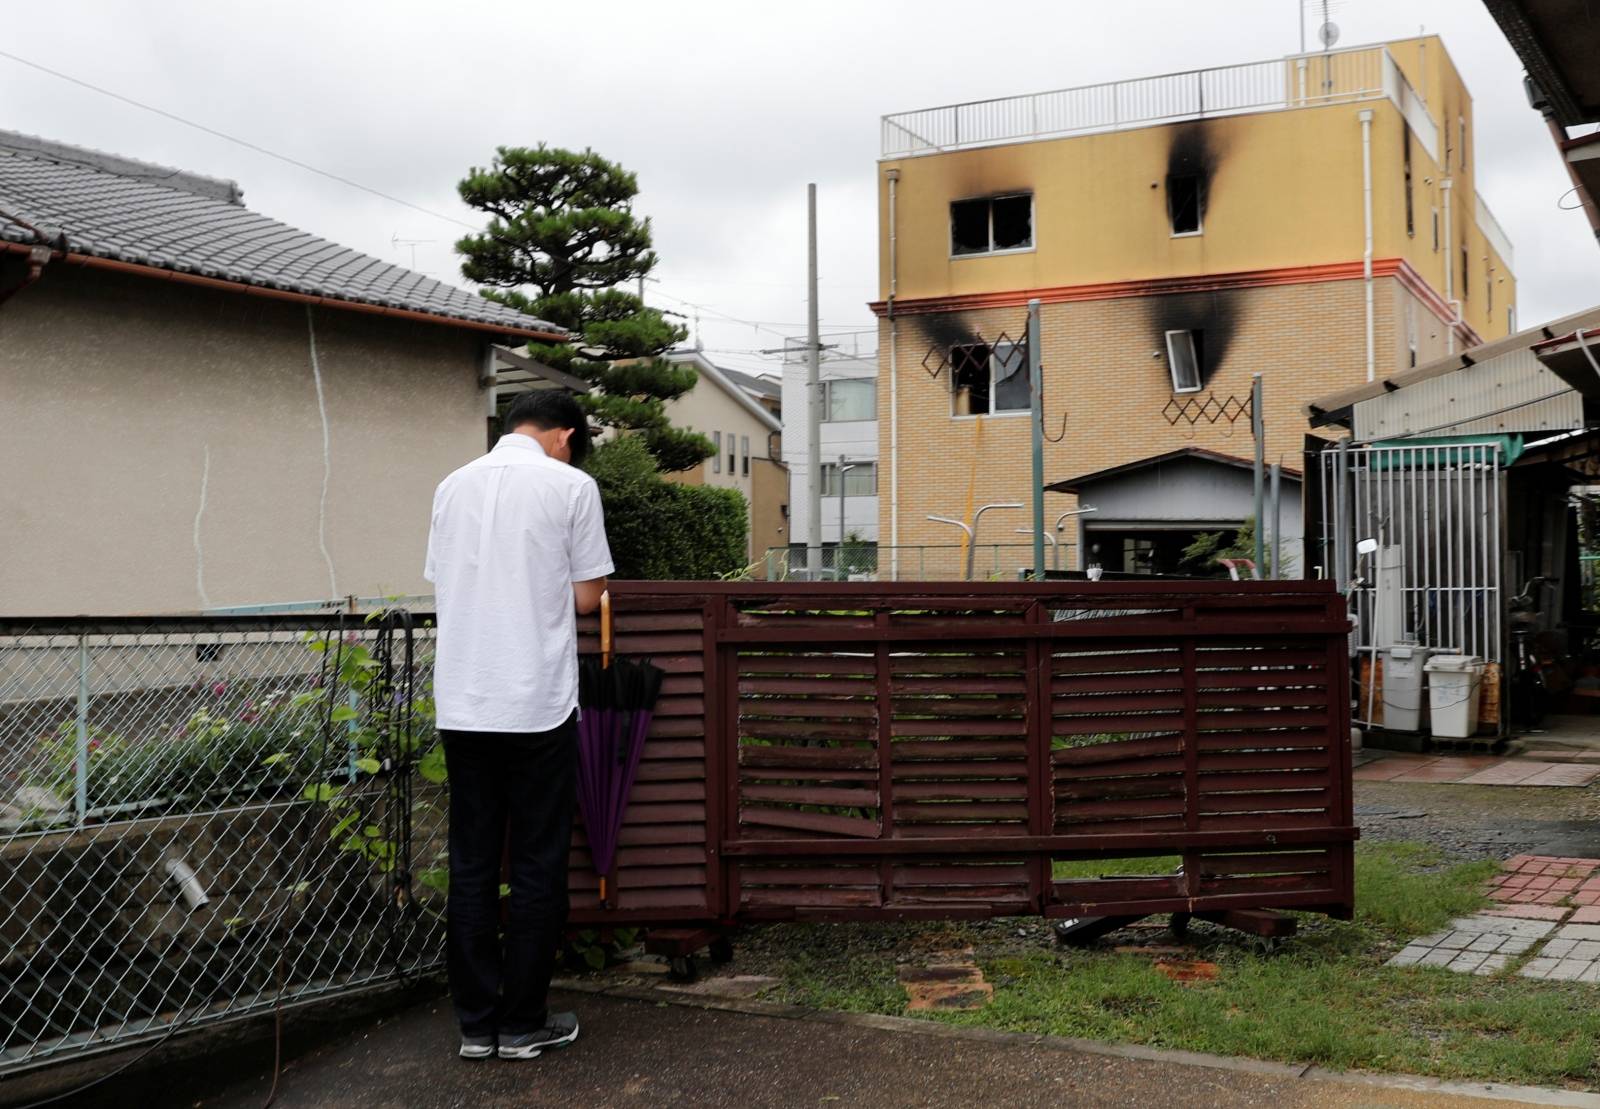 A man prays for the victims of the arson attack in front of the torched Kyoto Animation building n Kyoto